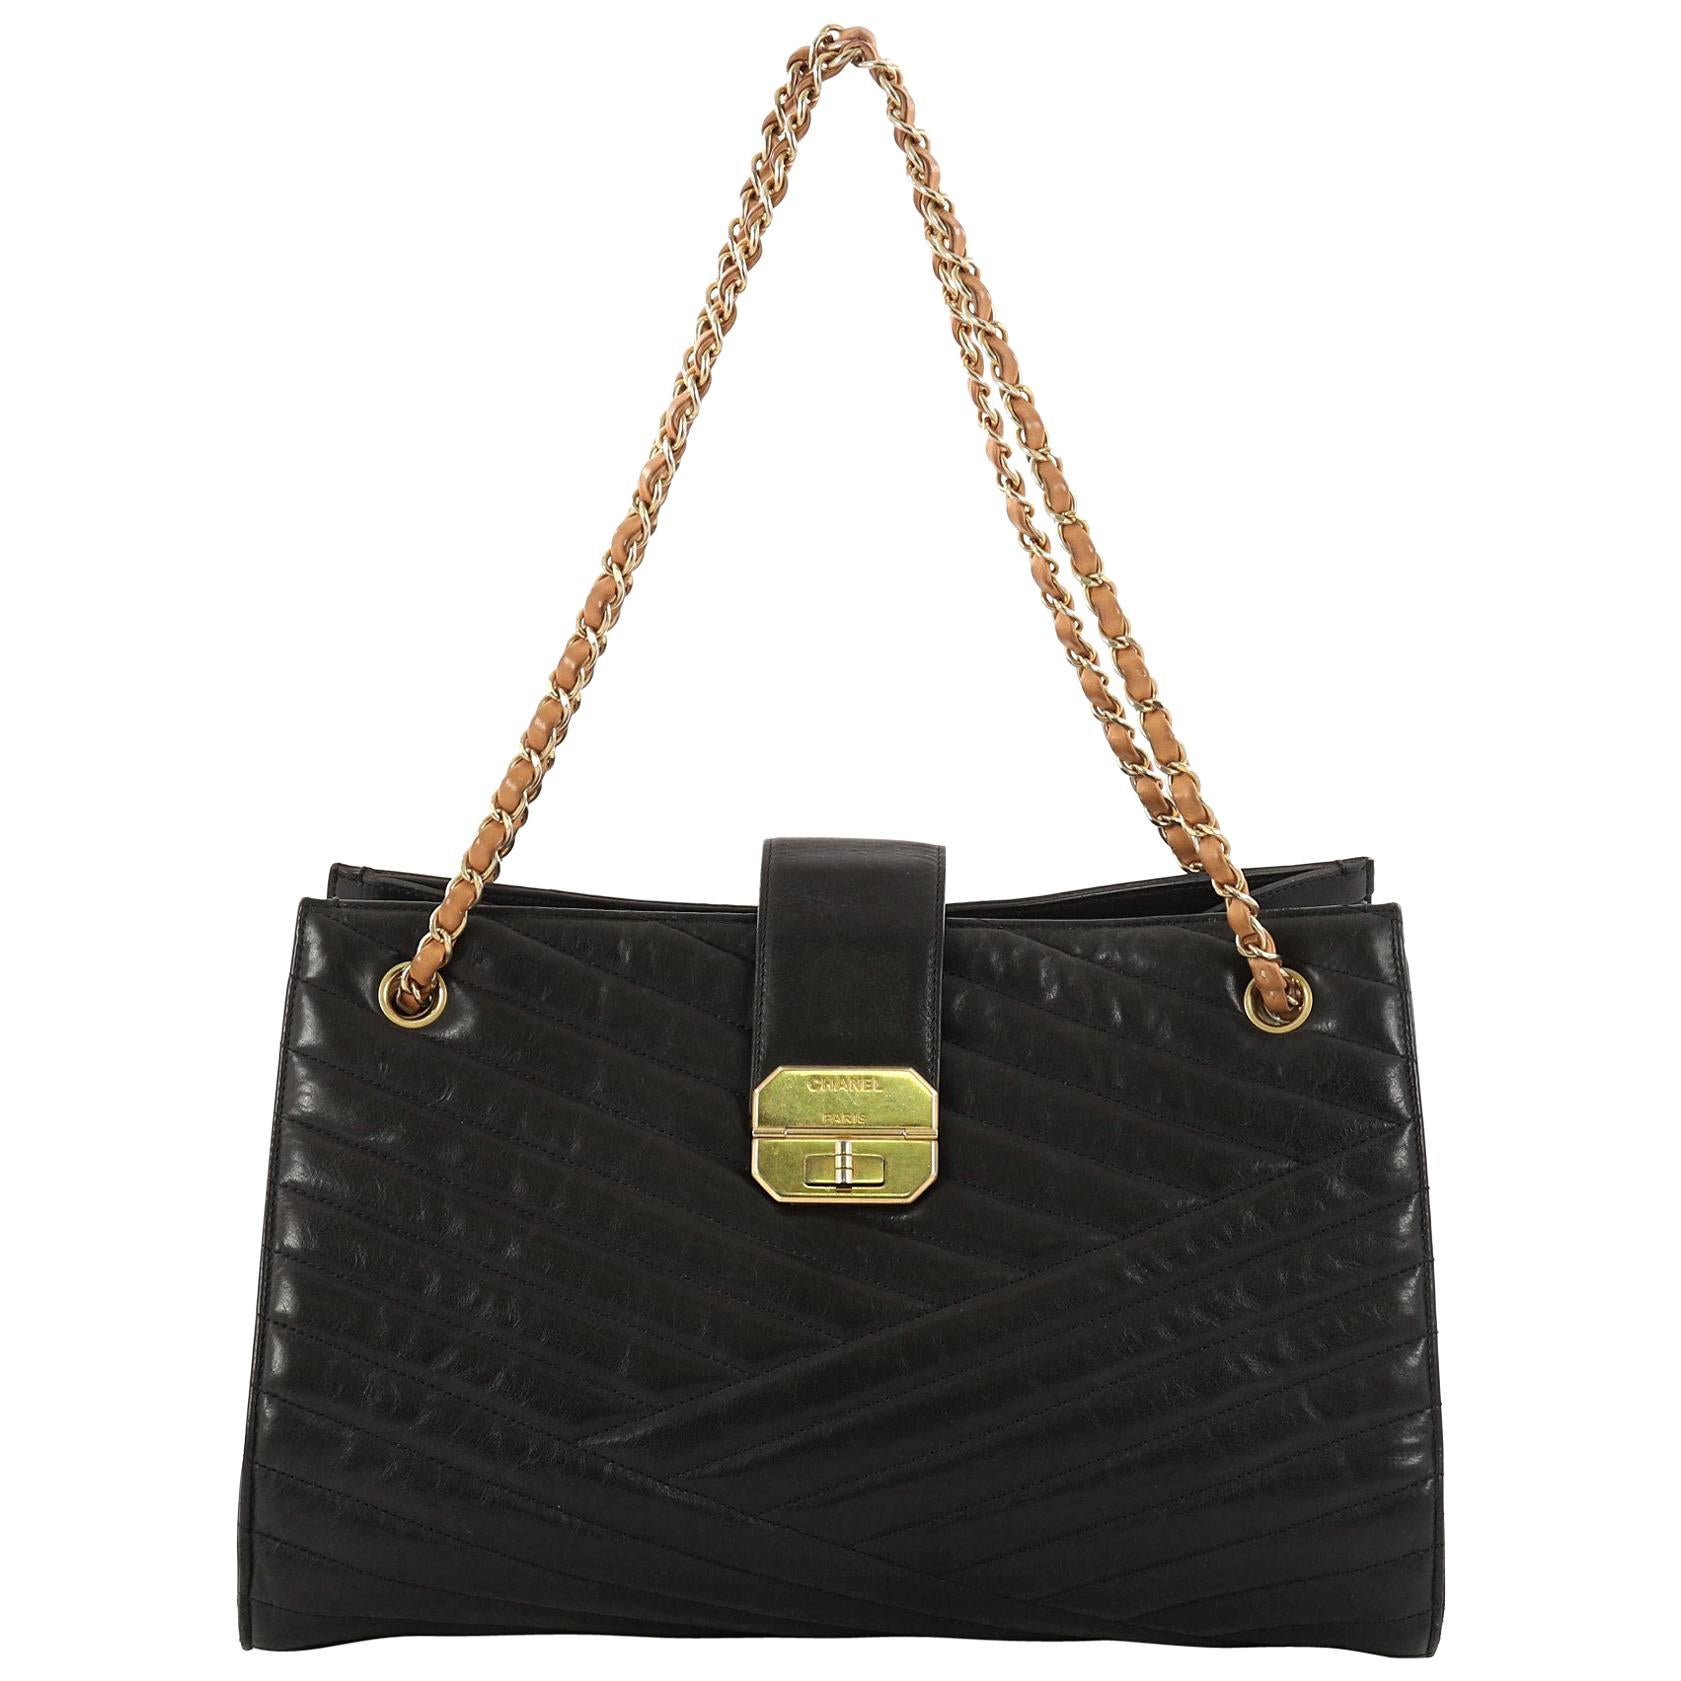 Chanel Gabrielle Tote Chevron Leather Large